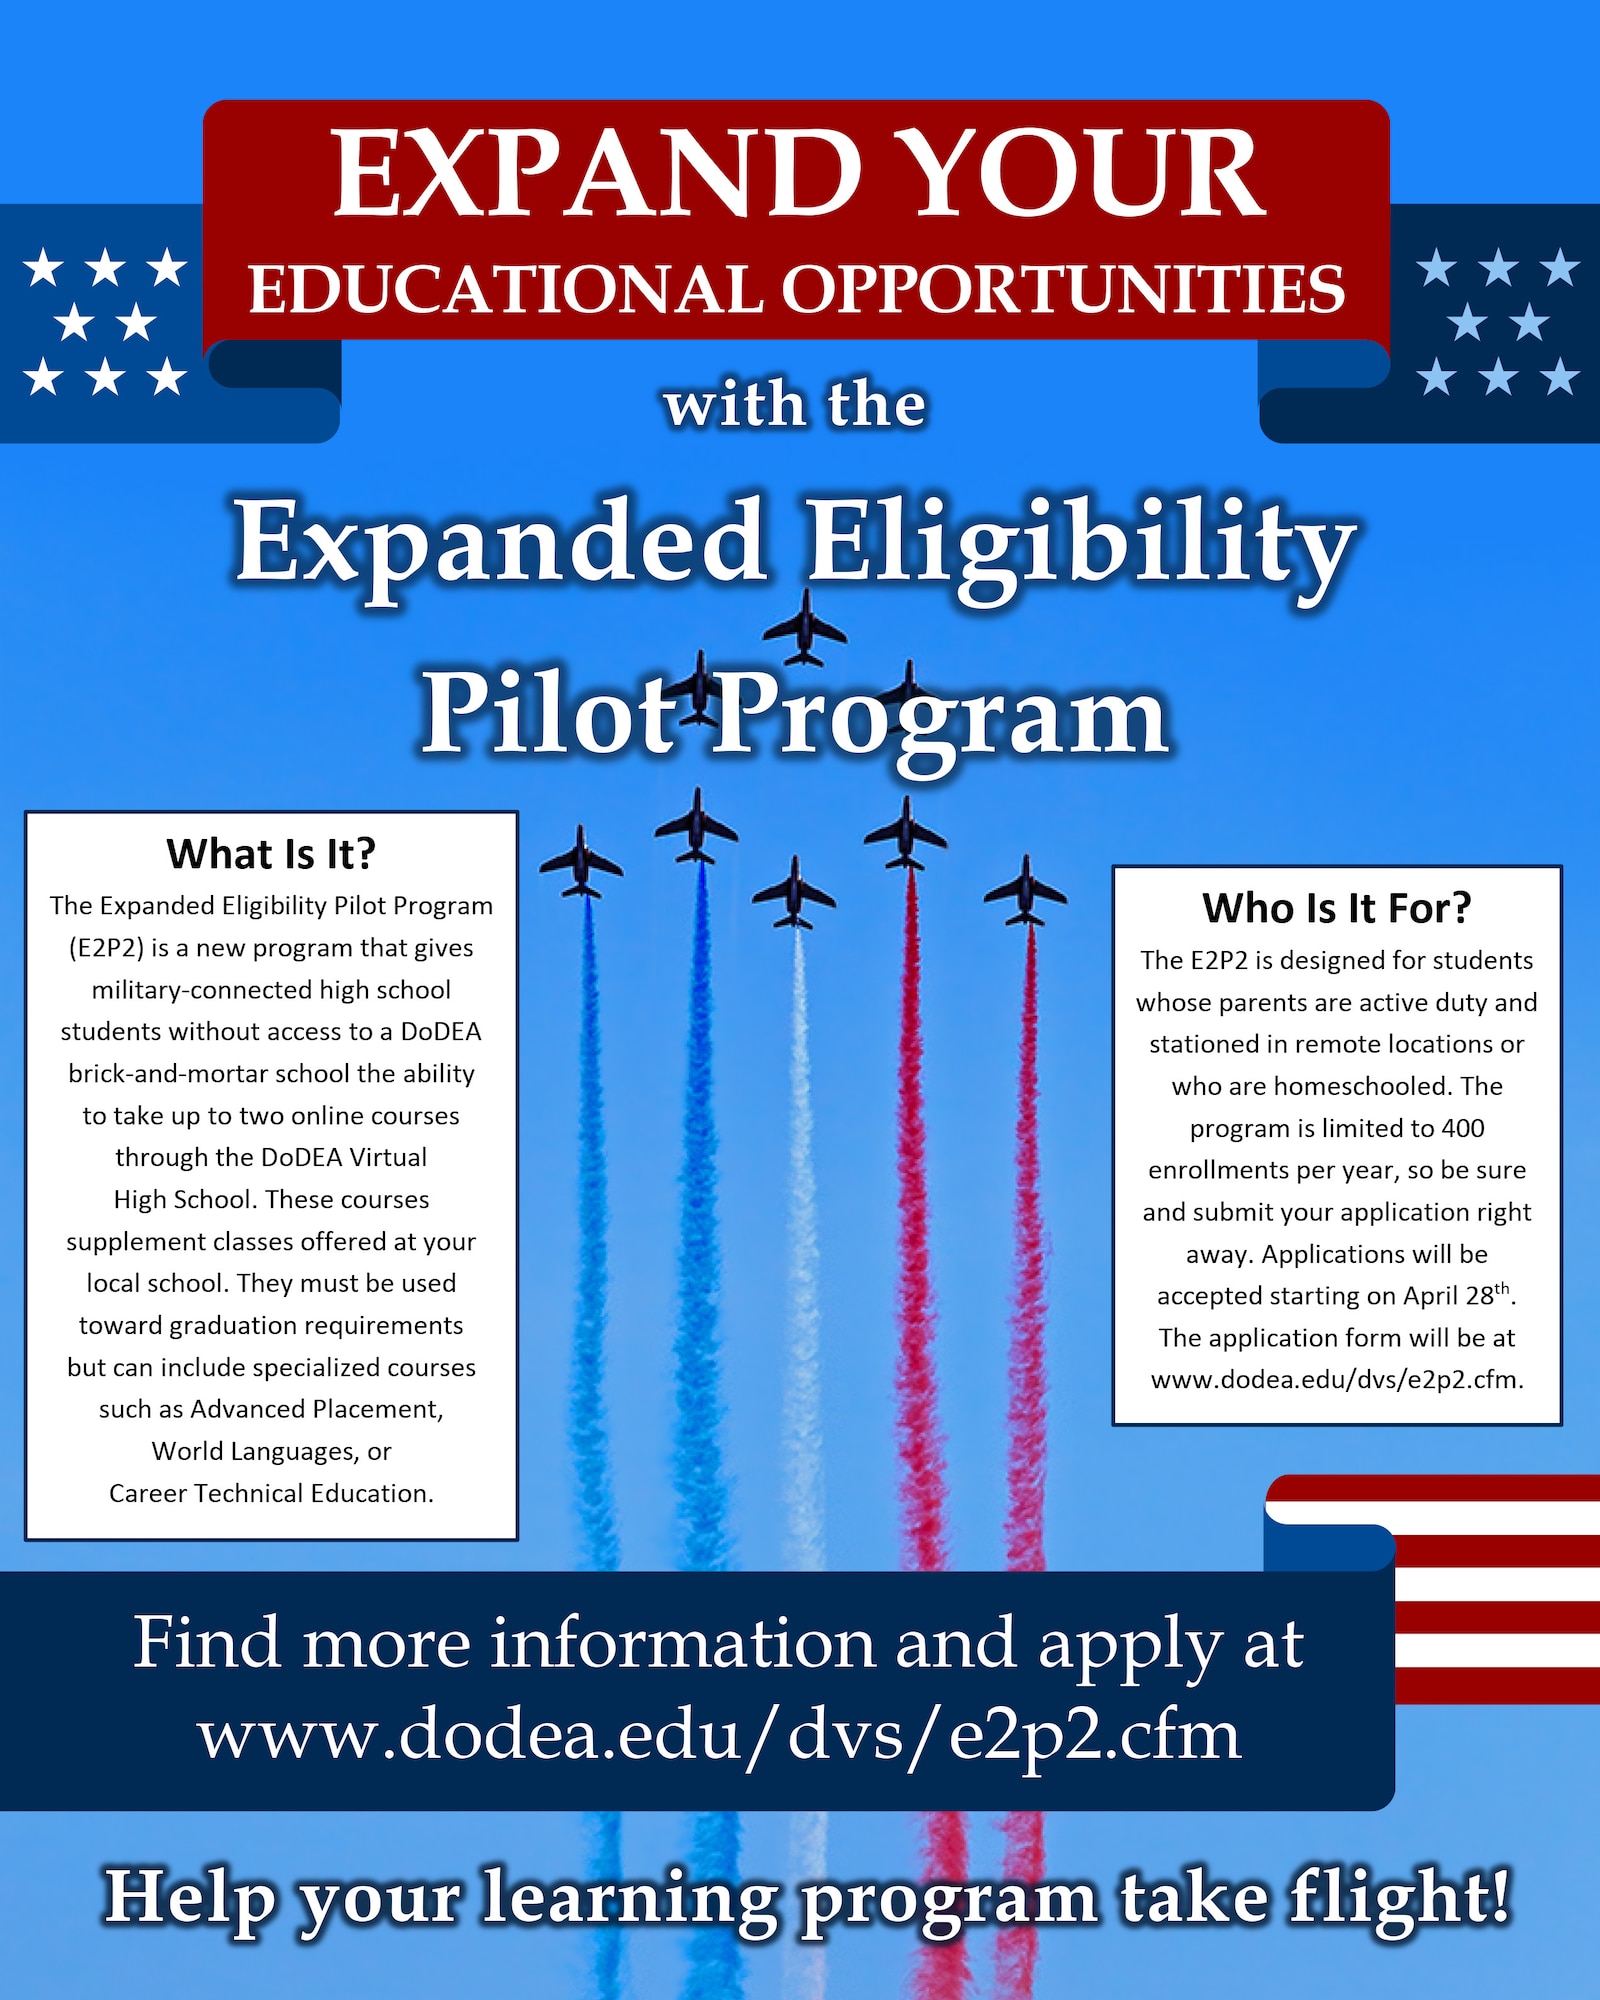 The Department of Defense Education Activity (DoDEA) is launching a new program aimed at expanding eligibility for dependents of active-duty members of the armed forces to register for the DoDEA Virtual High School (DVHS). The Expanded Eligibility Pilot Program, which will begin in school year 2021-22, was authorized as part of the 2021 National Defense Authorization Act, providing expansion of eligibility for DVHS to stateside active-duty military dependents in grades 9-12 who are currently ineligible for the DVHS.